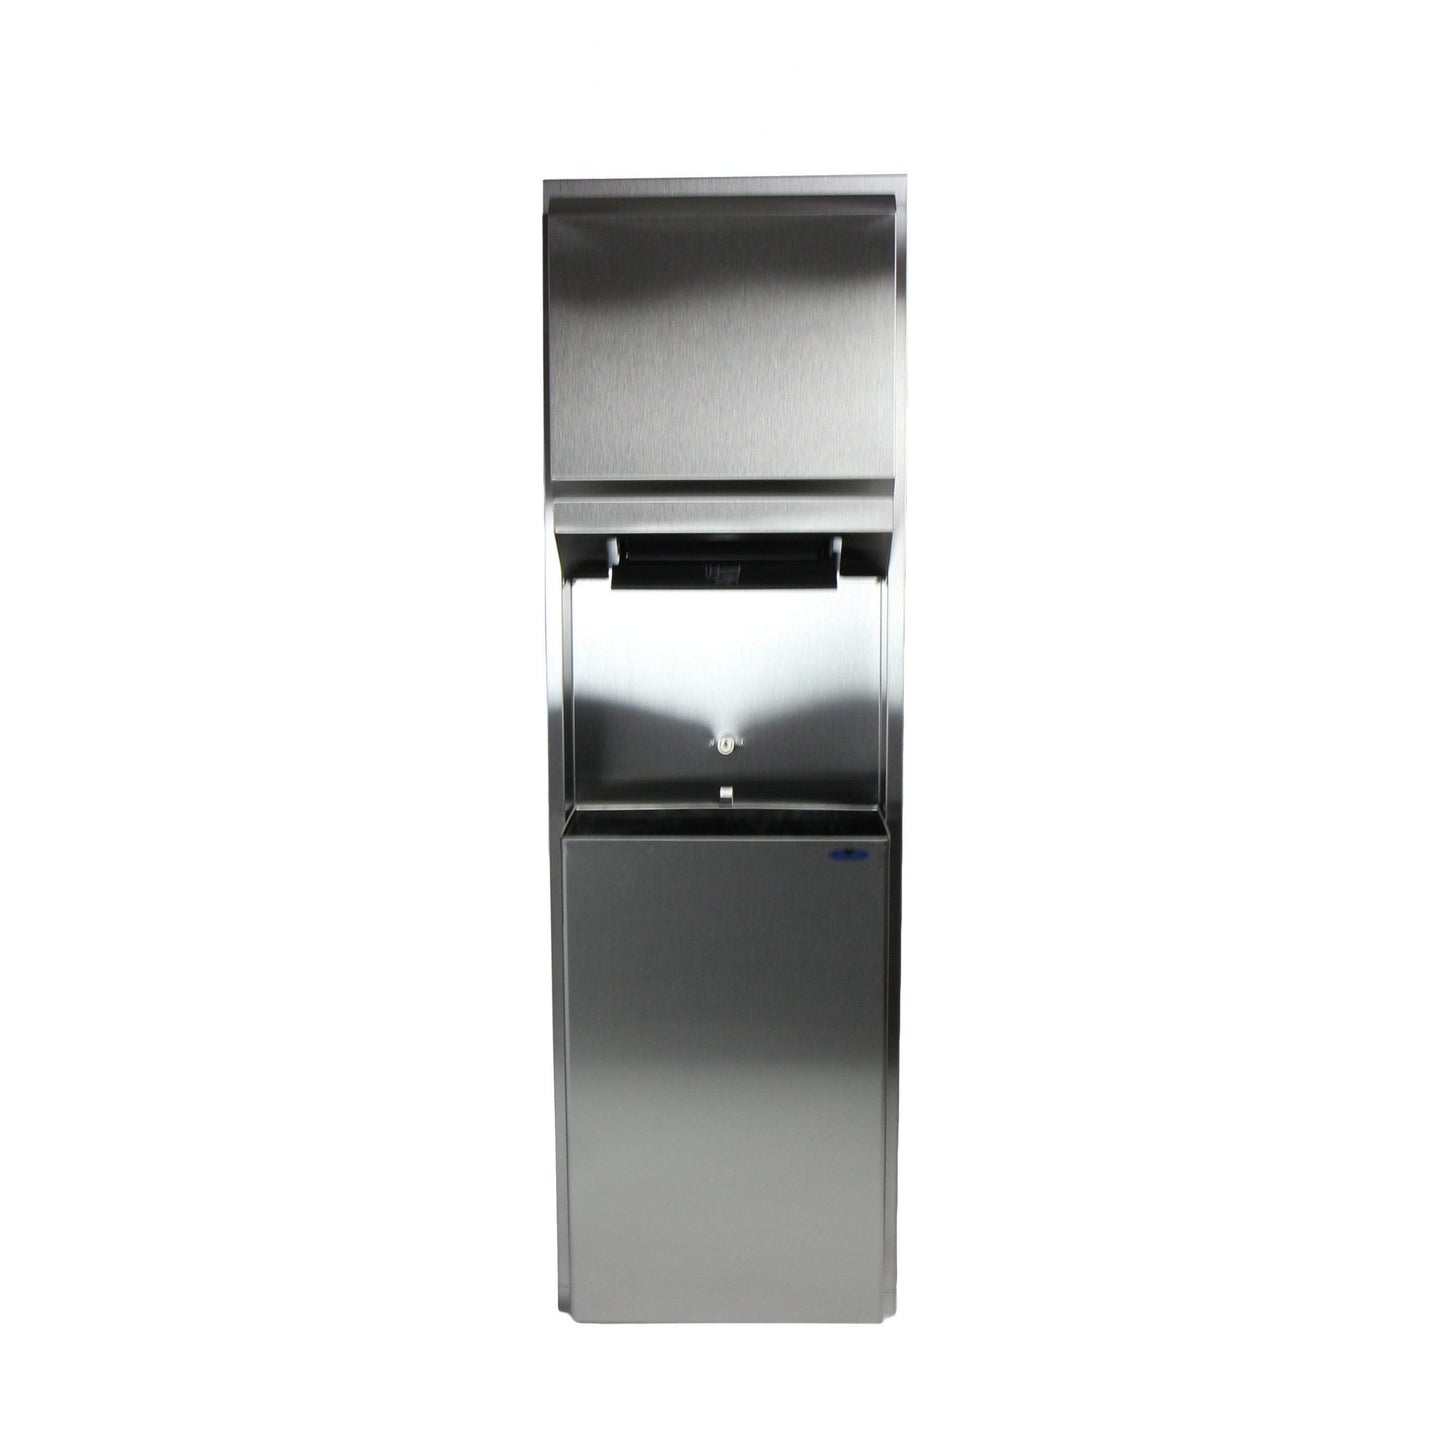 Frost 422-50A Recessed Stainless Steel Paper Dispenser and Disposal